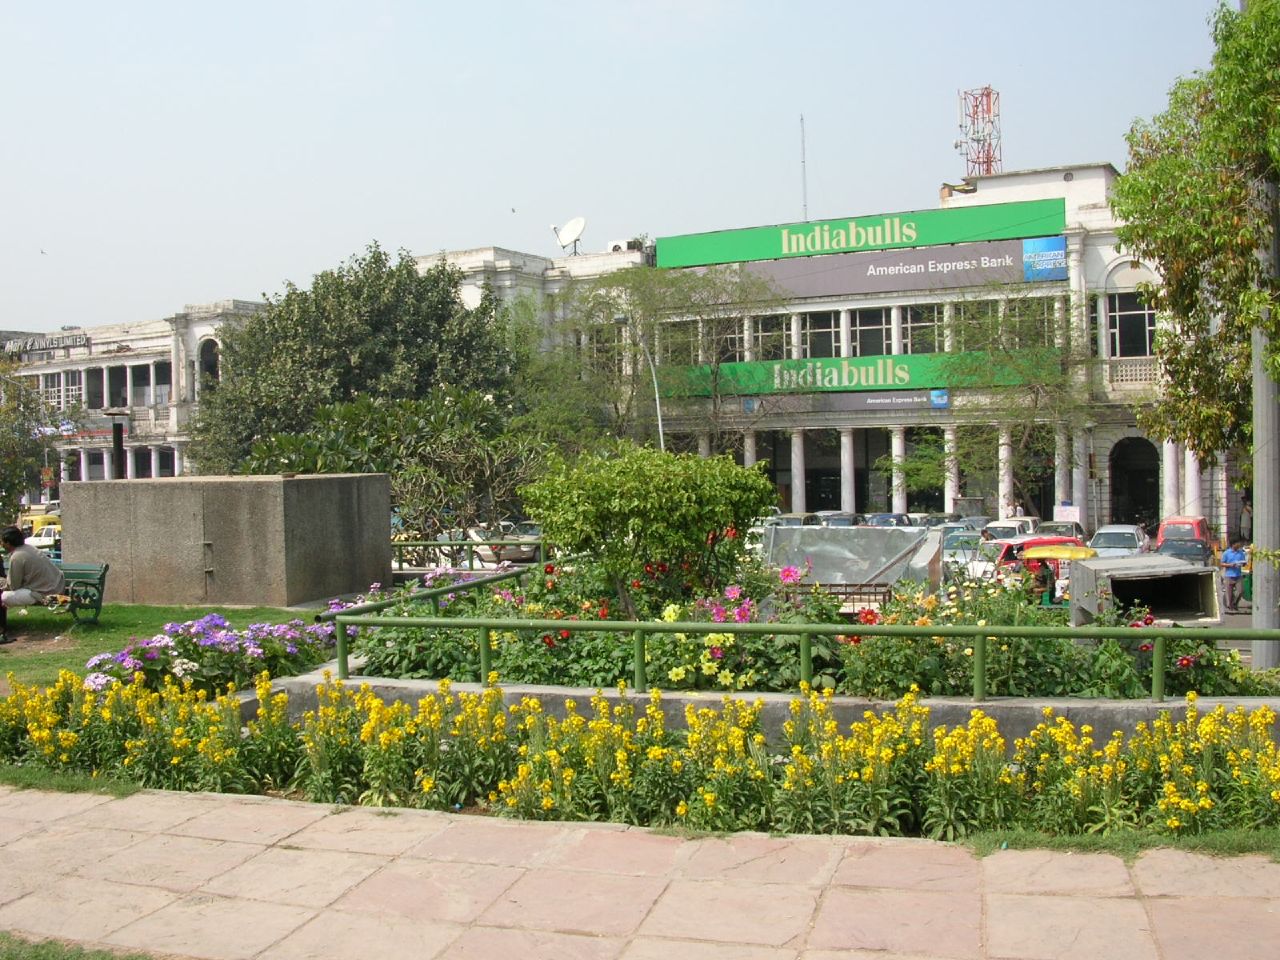 a green building next to yellow flowers and trees